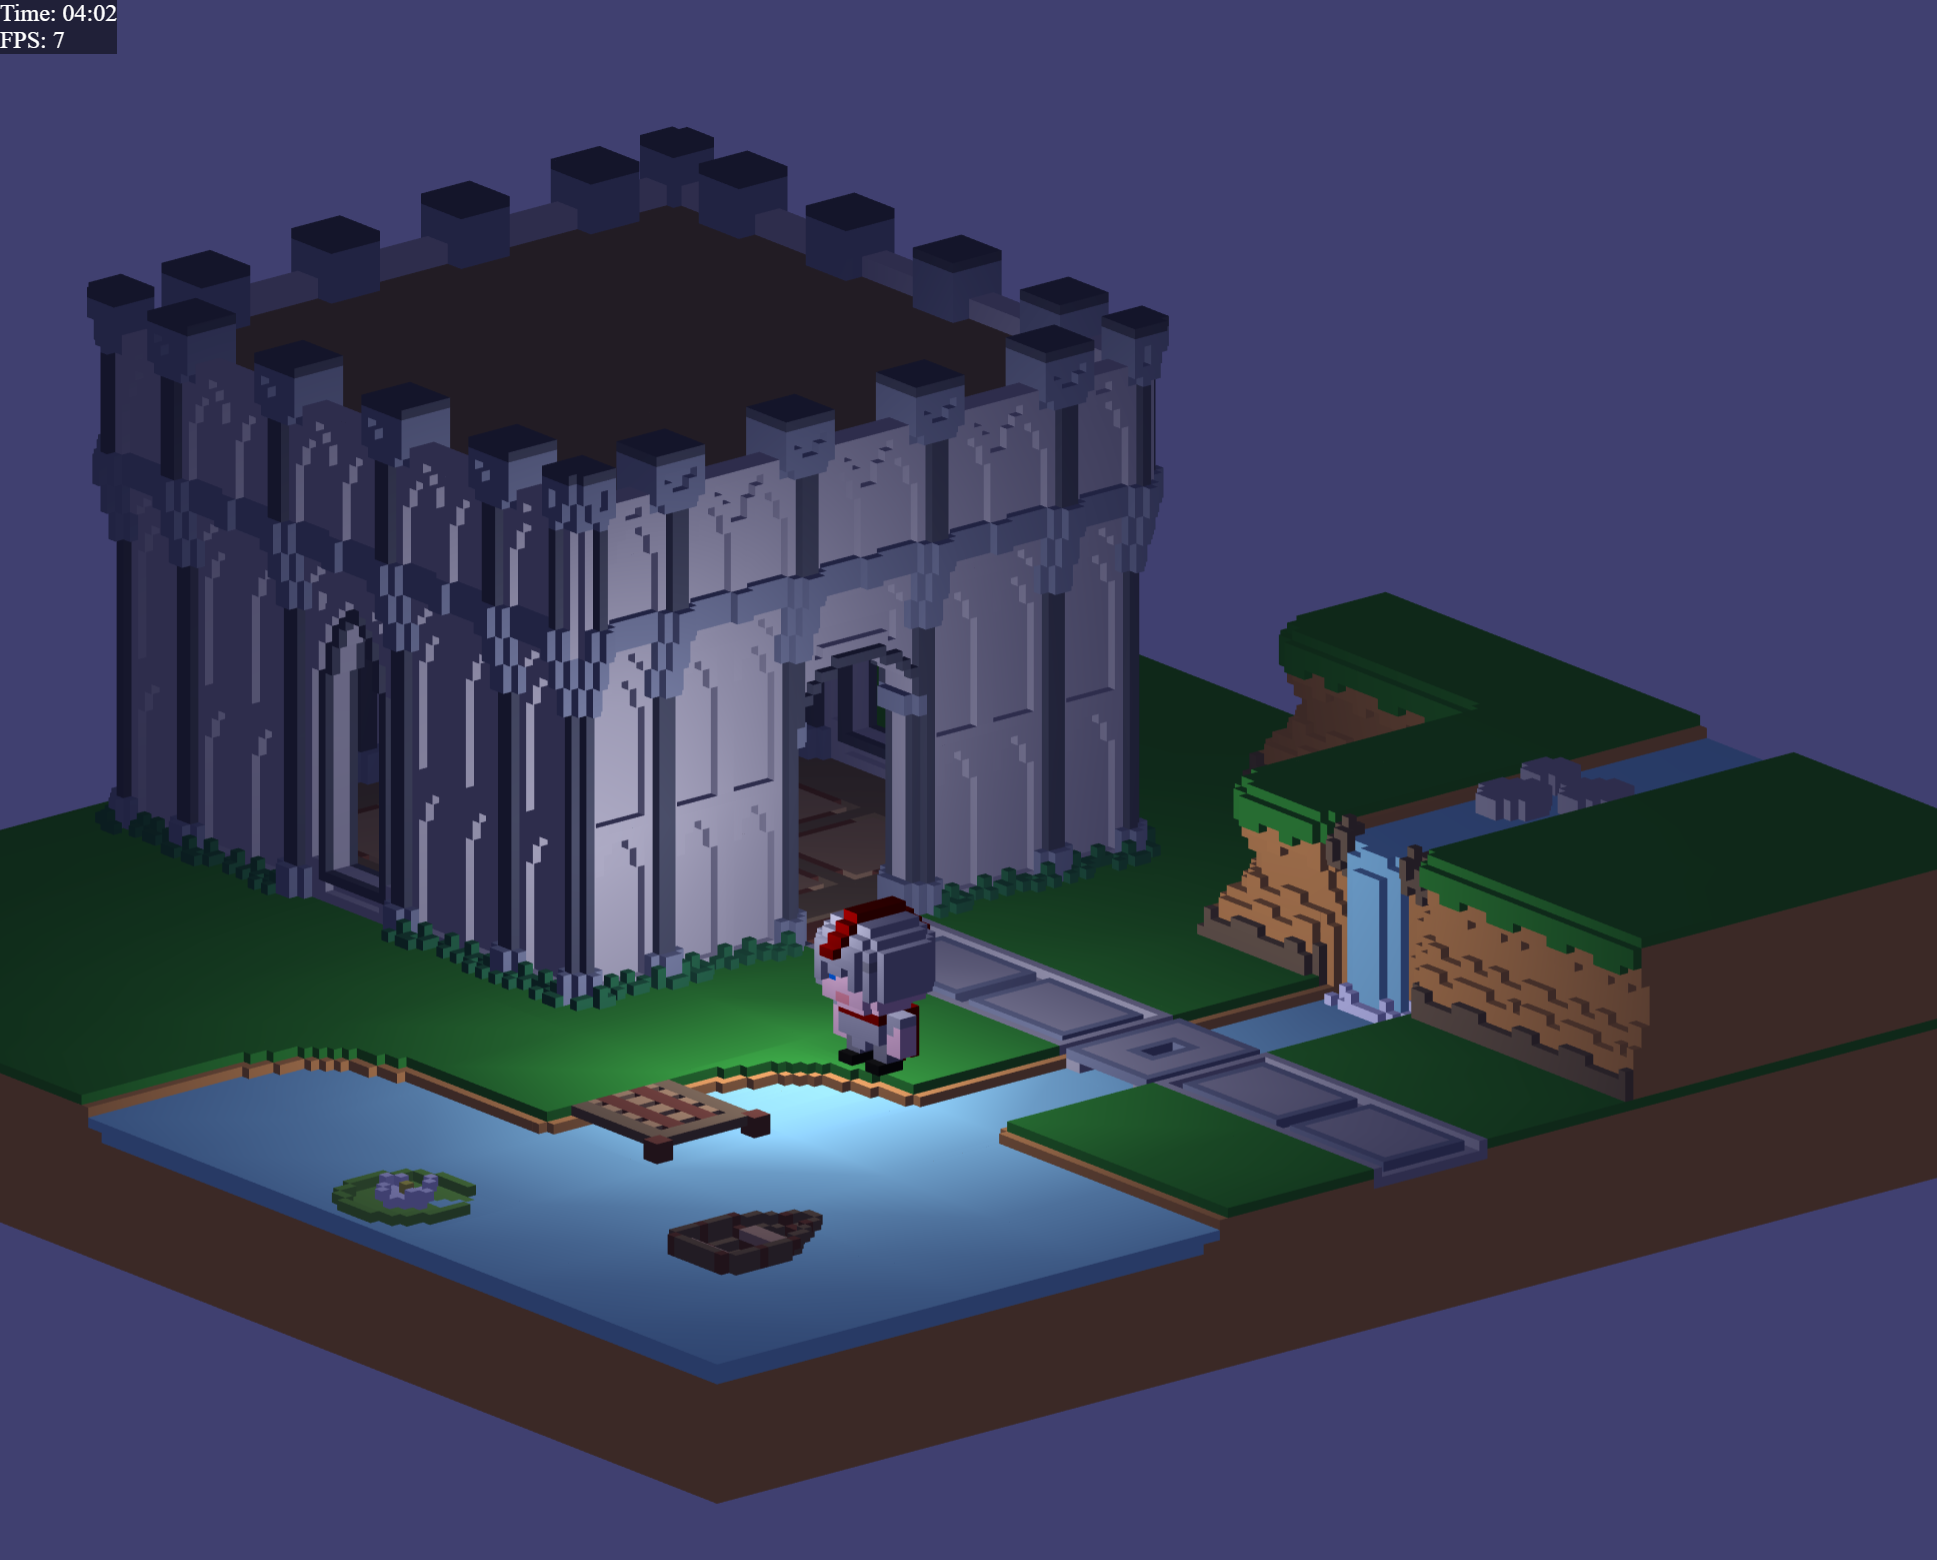 A voxel castle, from early in the experimentation process